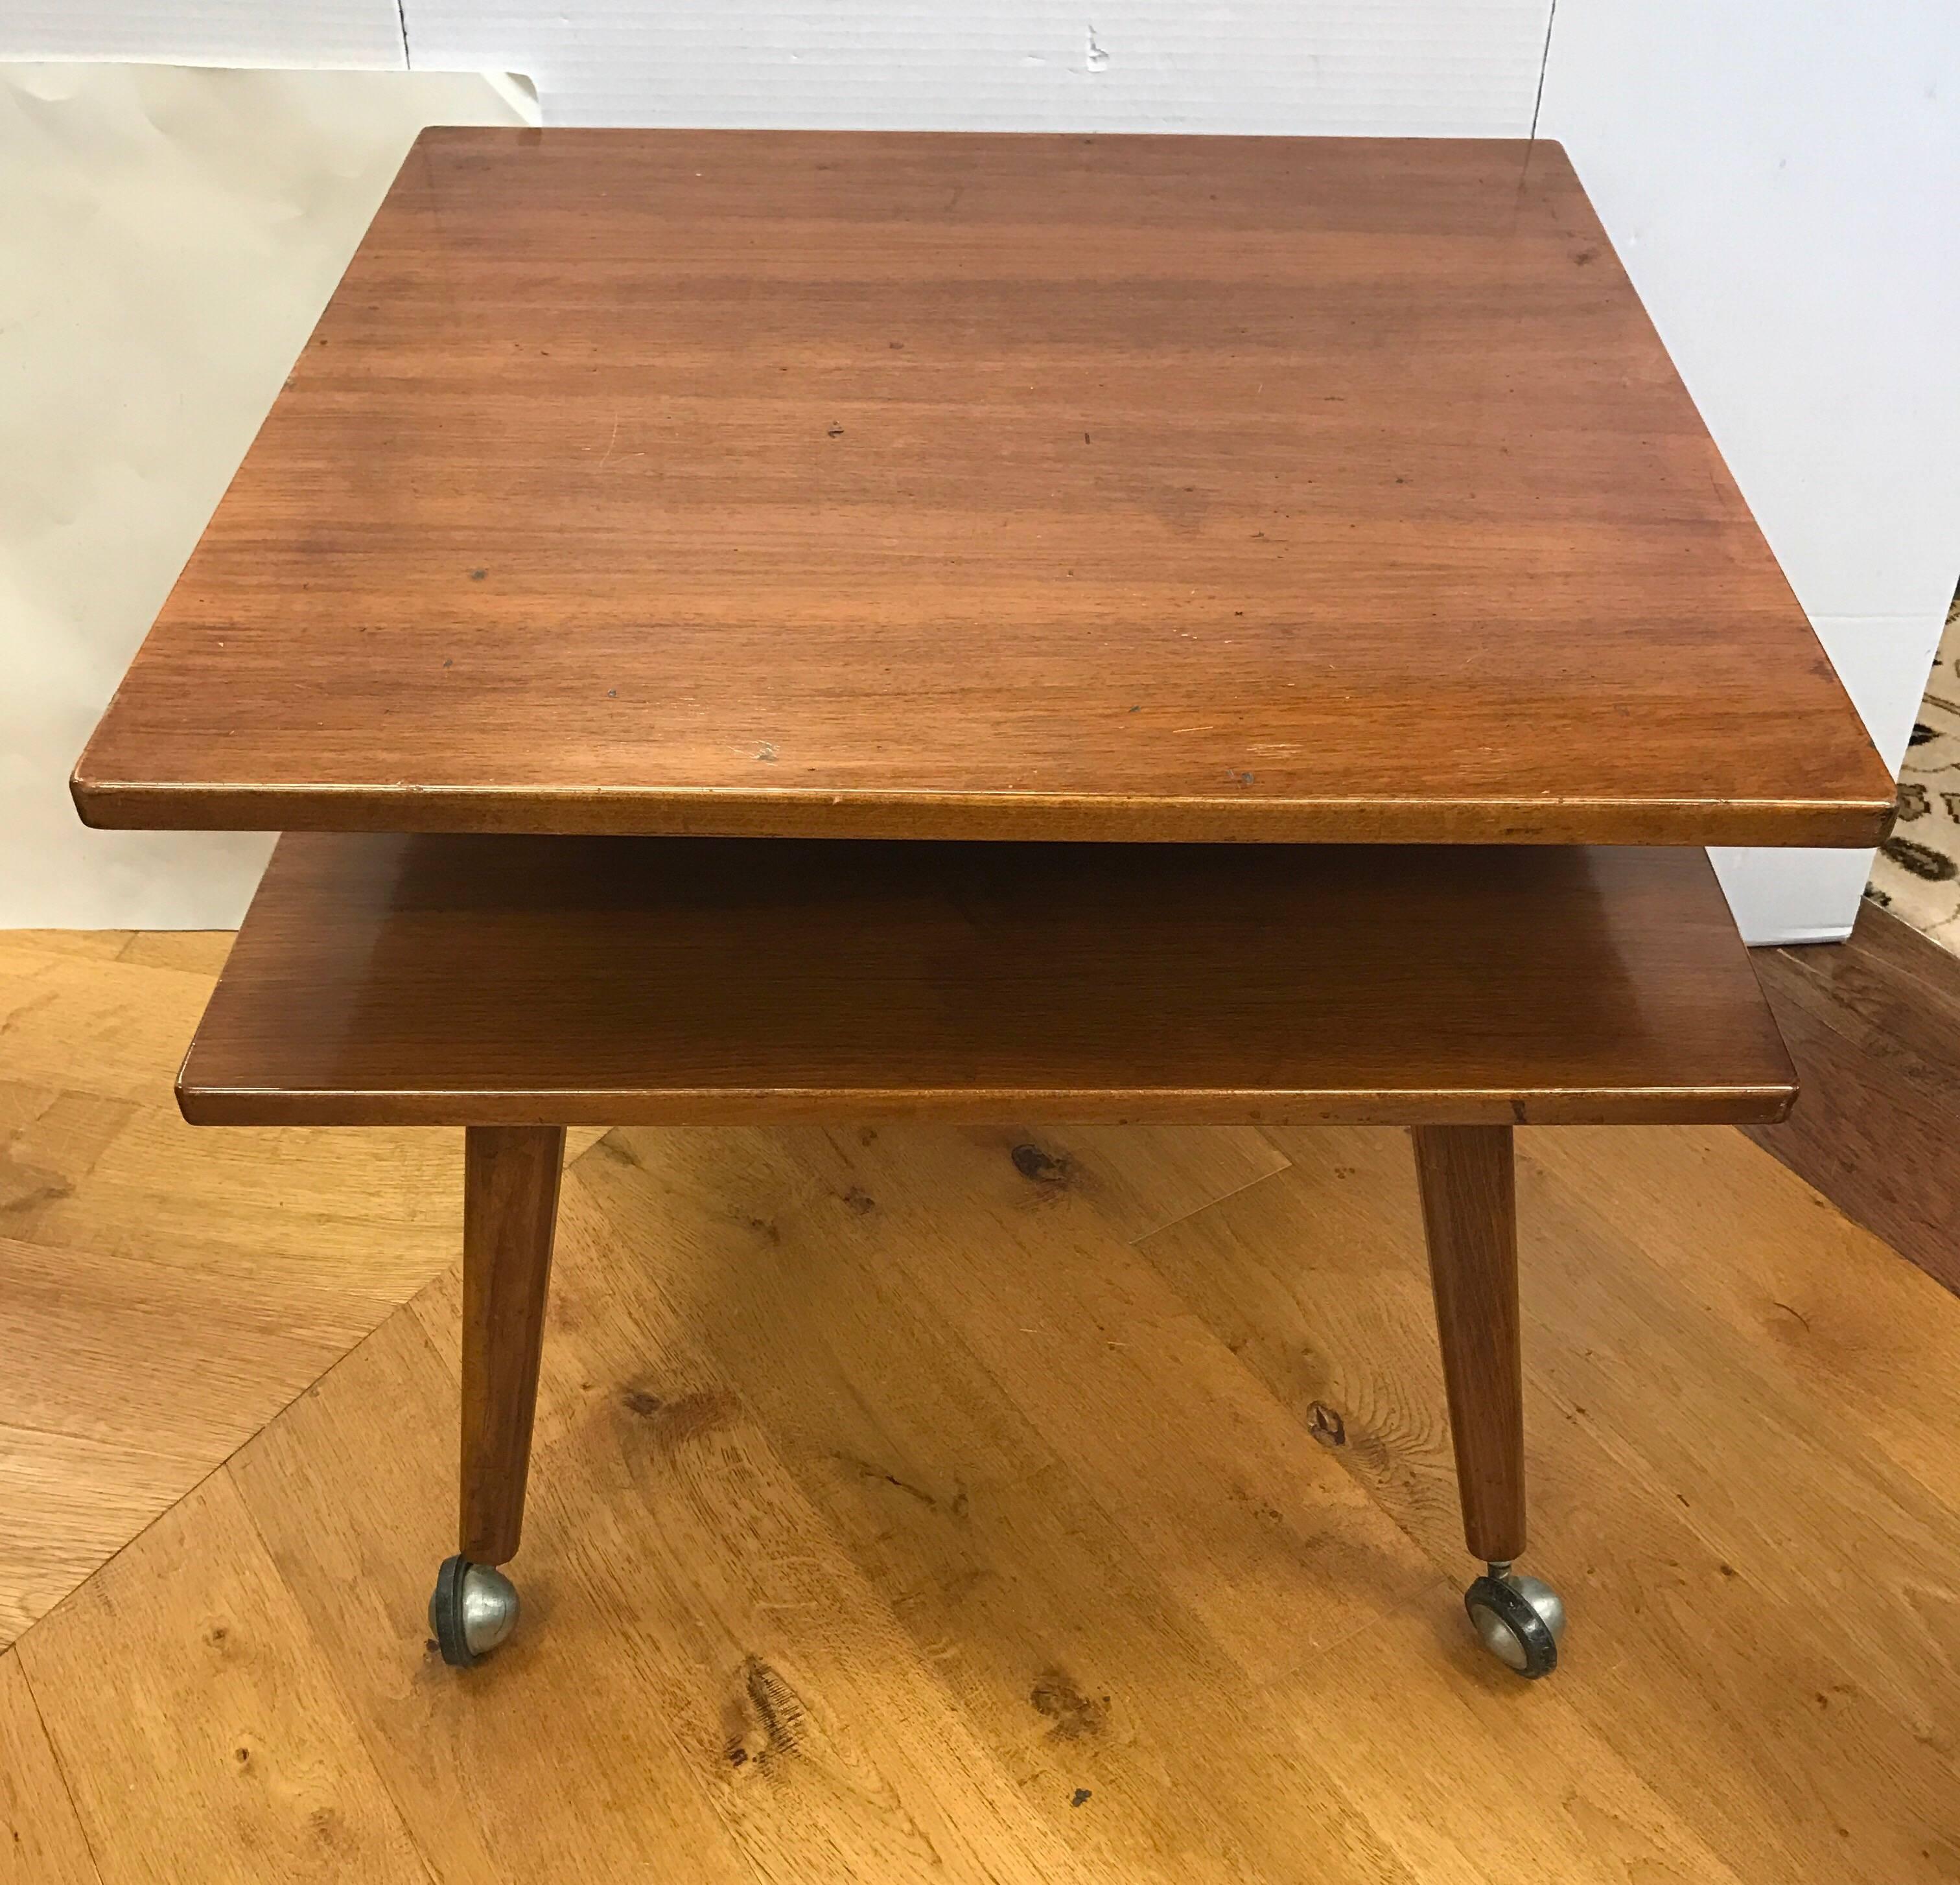 Swedish DUX midcentury two-tier table done in teak and features caster for feet for ease of movement.
DUX's made in Sweden logo incised at bottom.